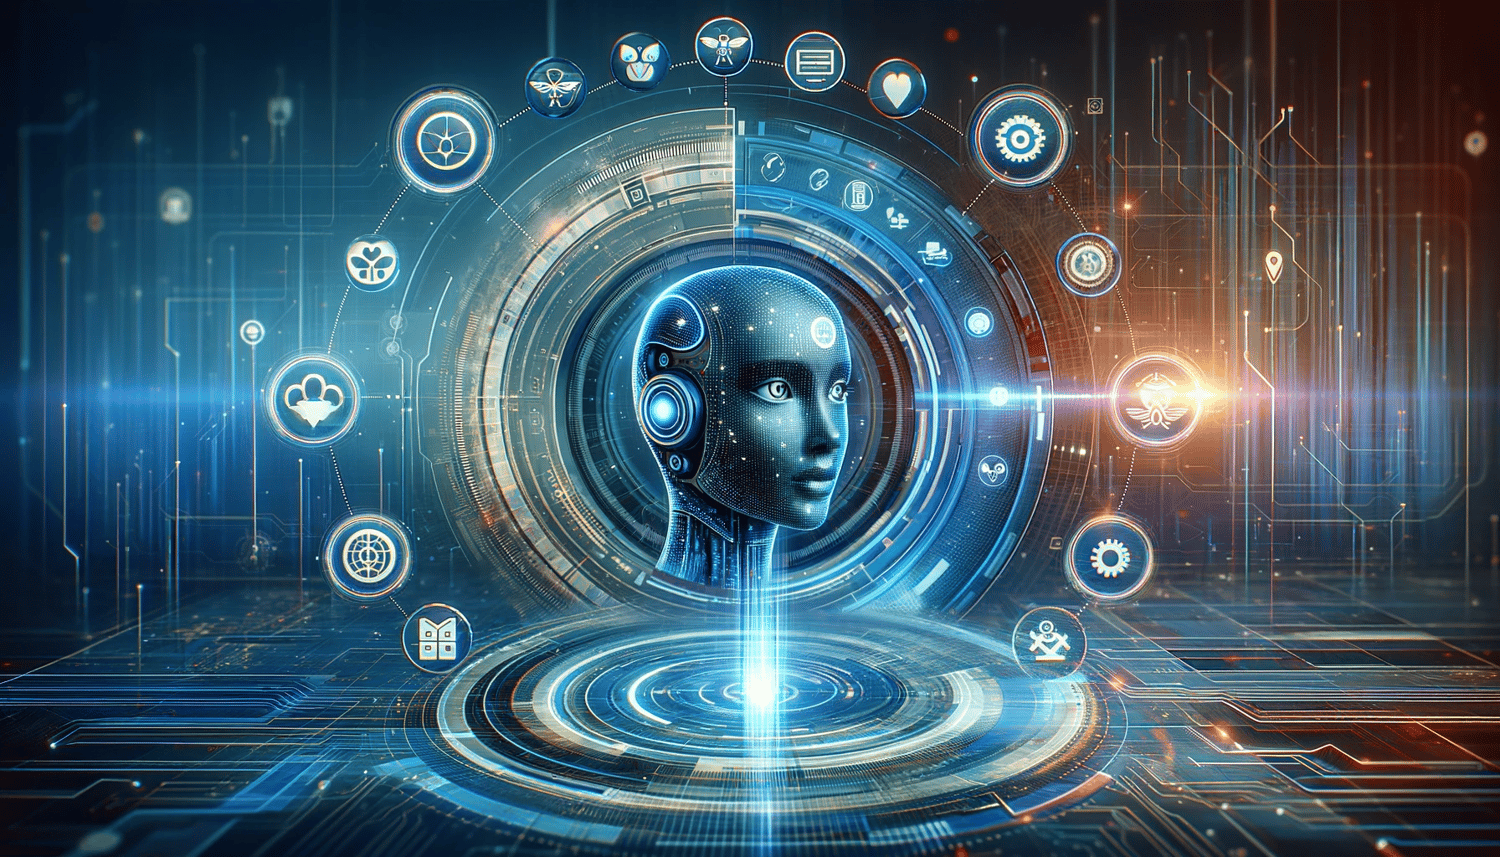 An image depicting a futuristic AI assistant in the form of ChatGPT, showing a digital interface with various sectors